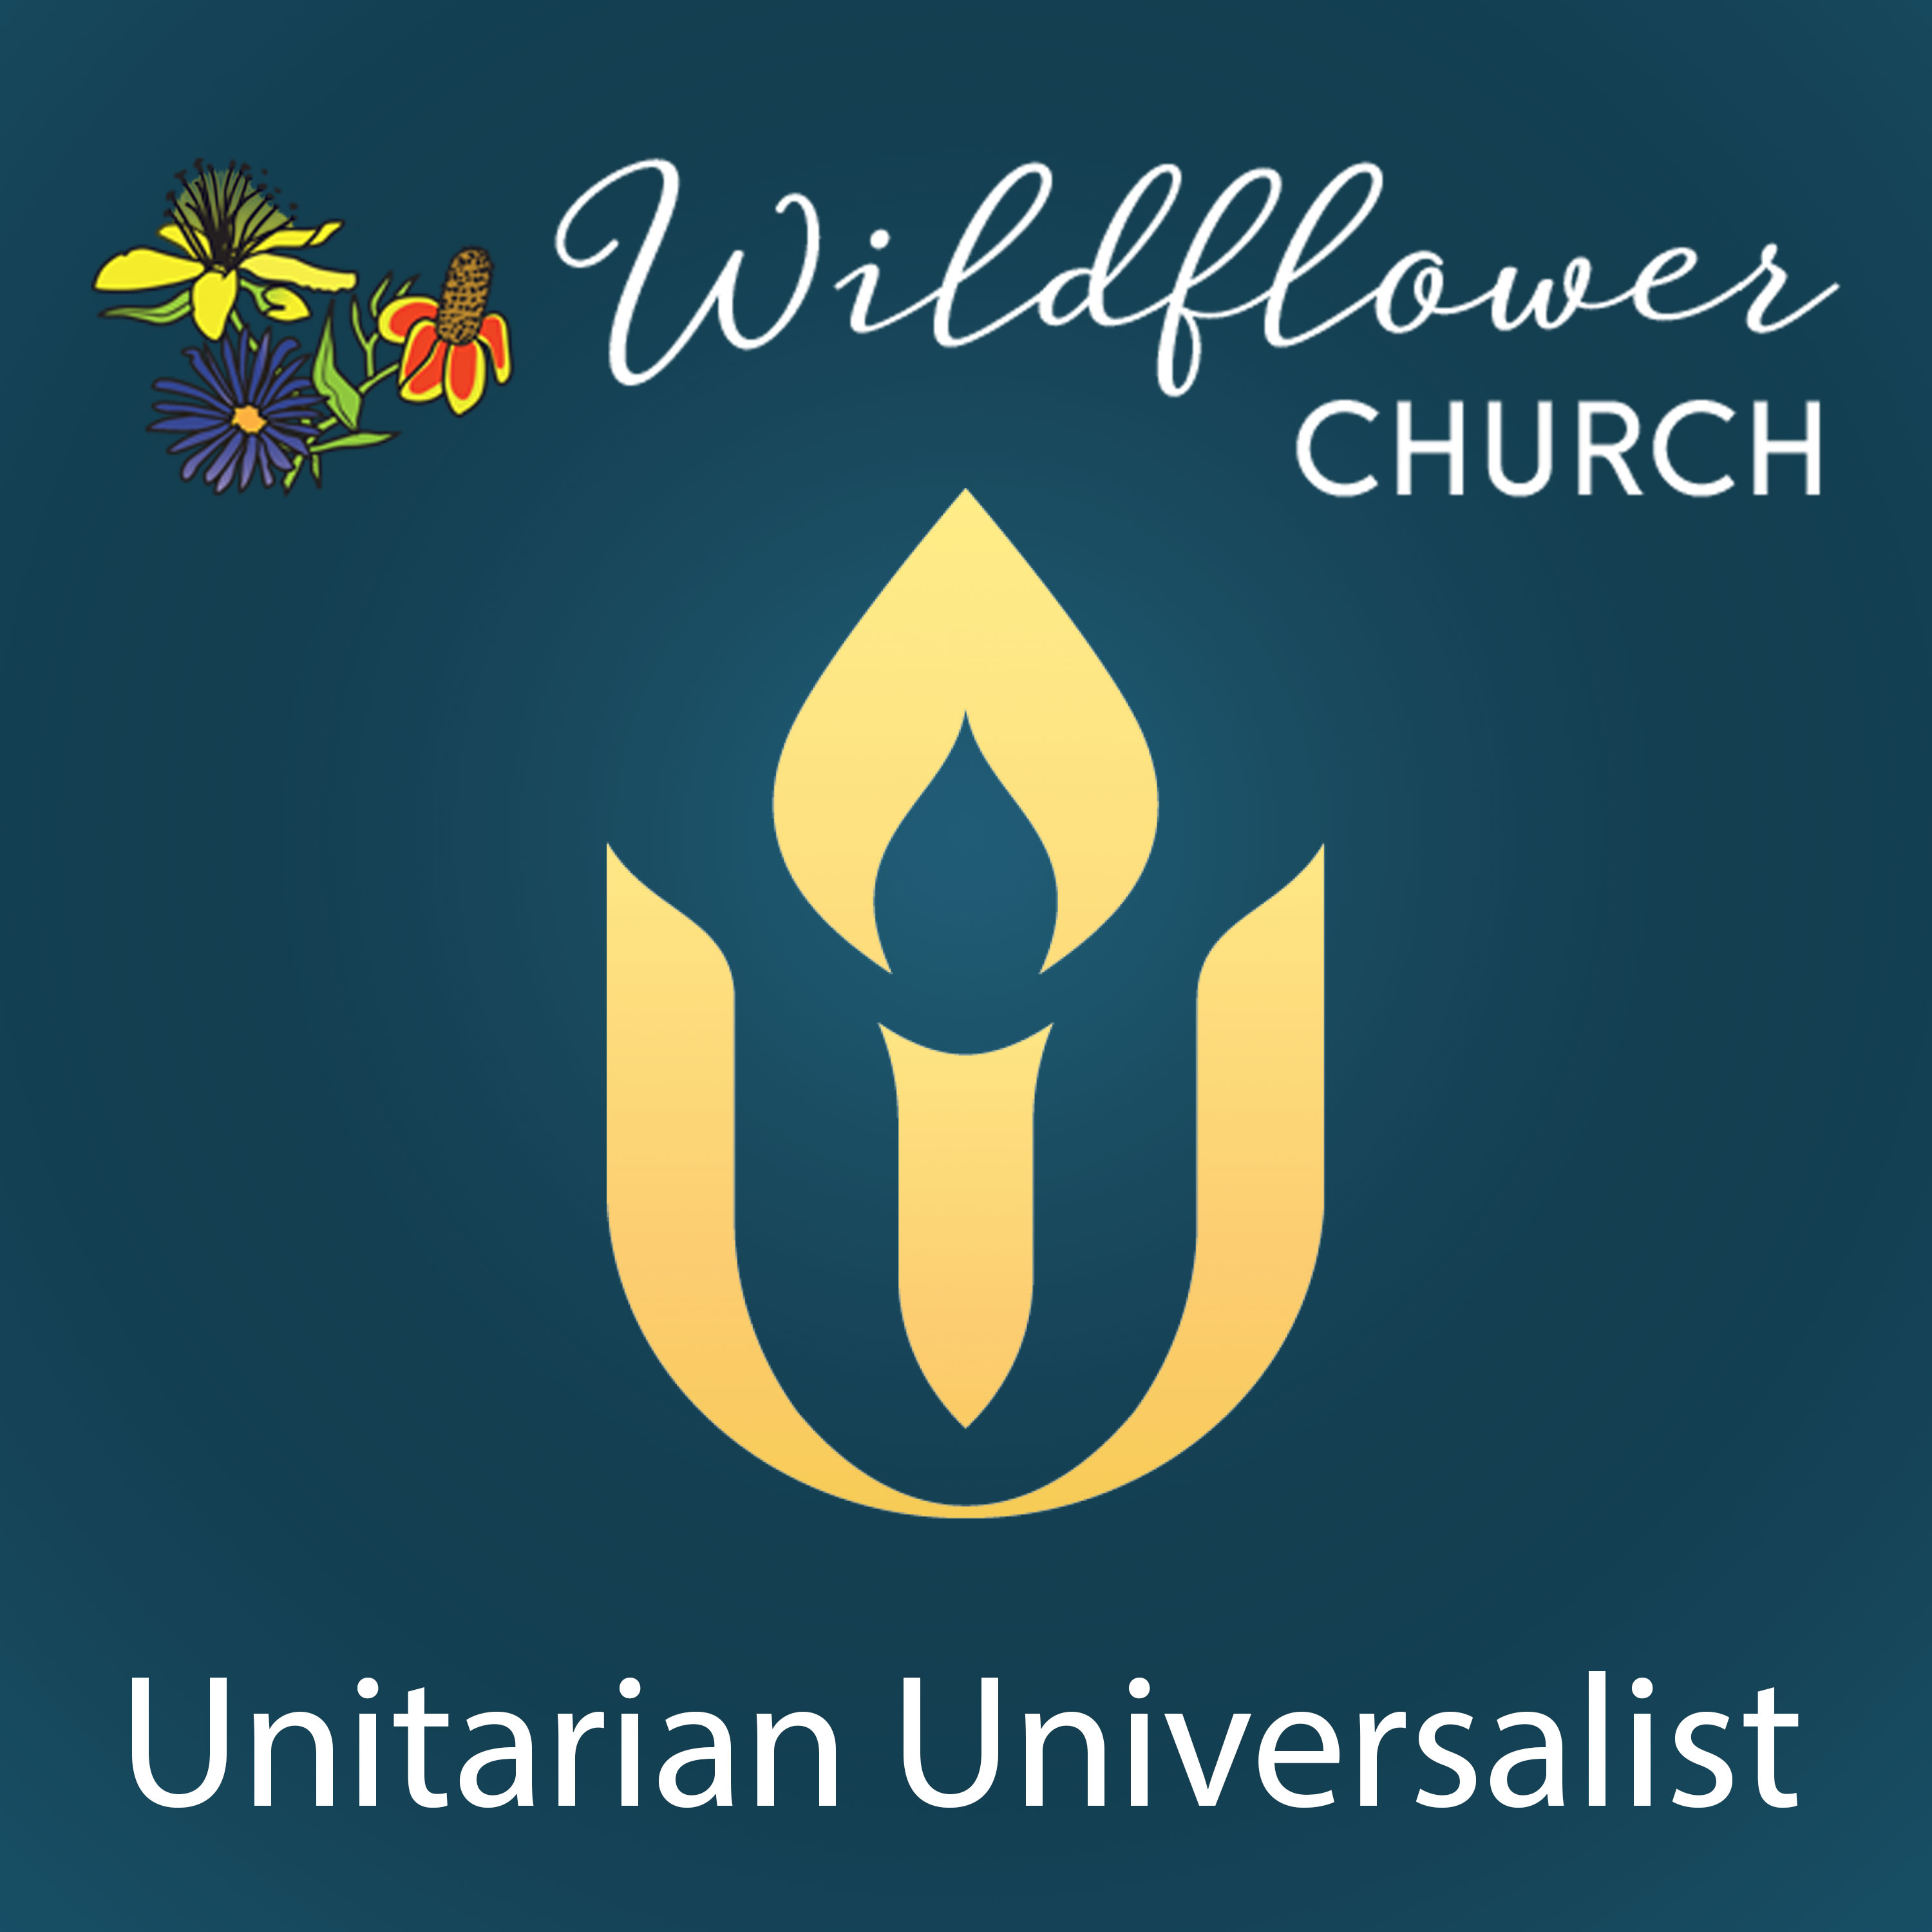 Is There a Place for the Supernatural in Unitarian Universalism?